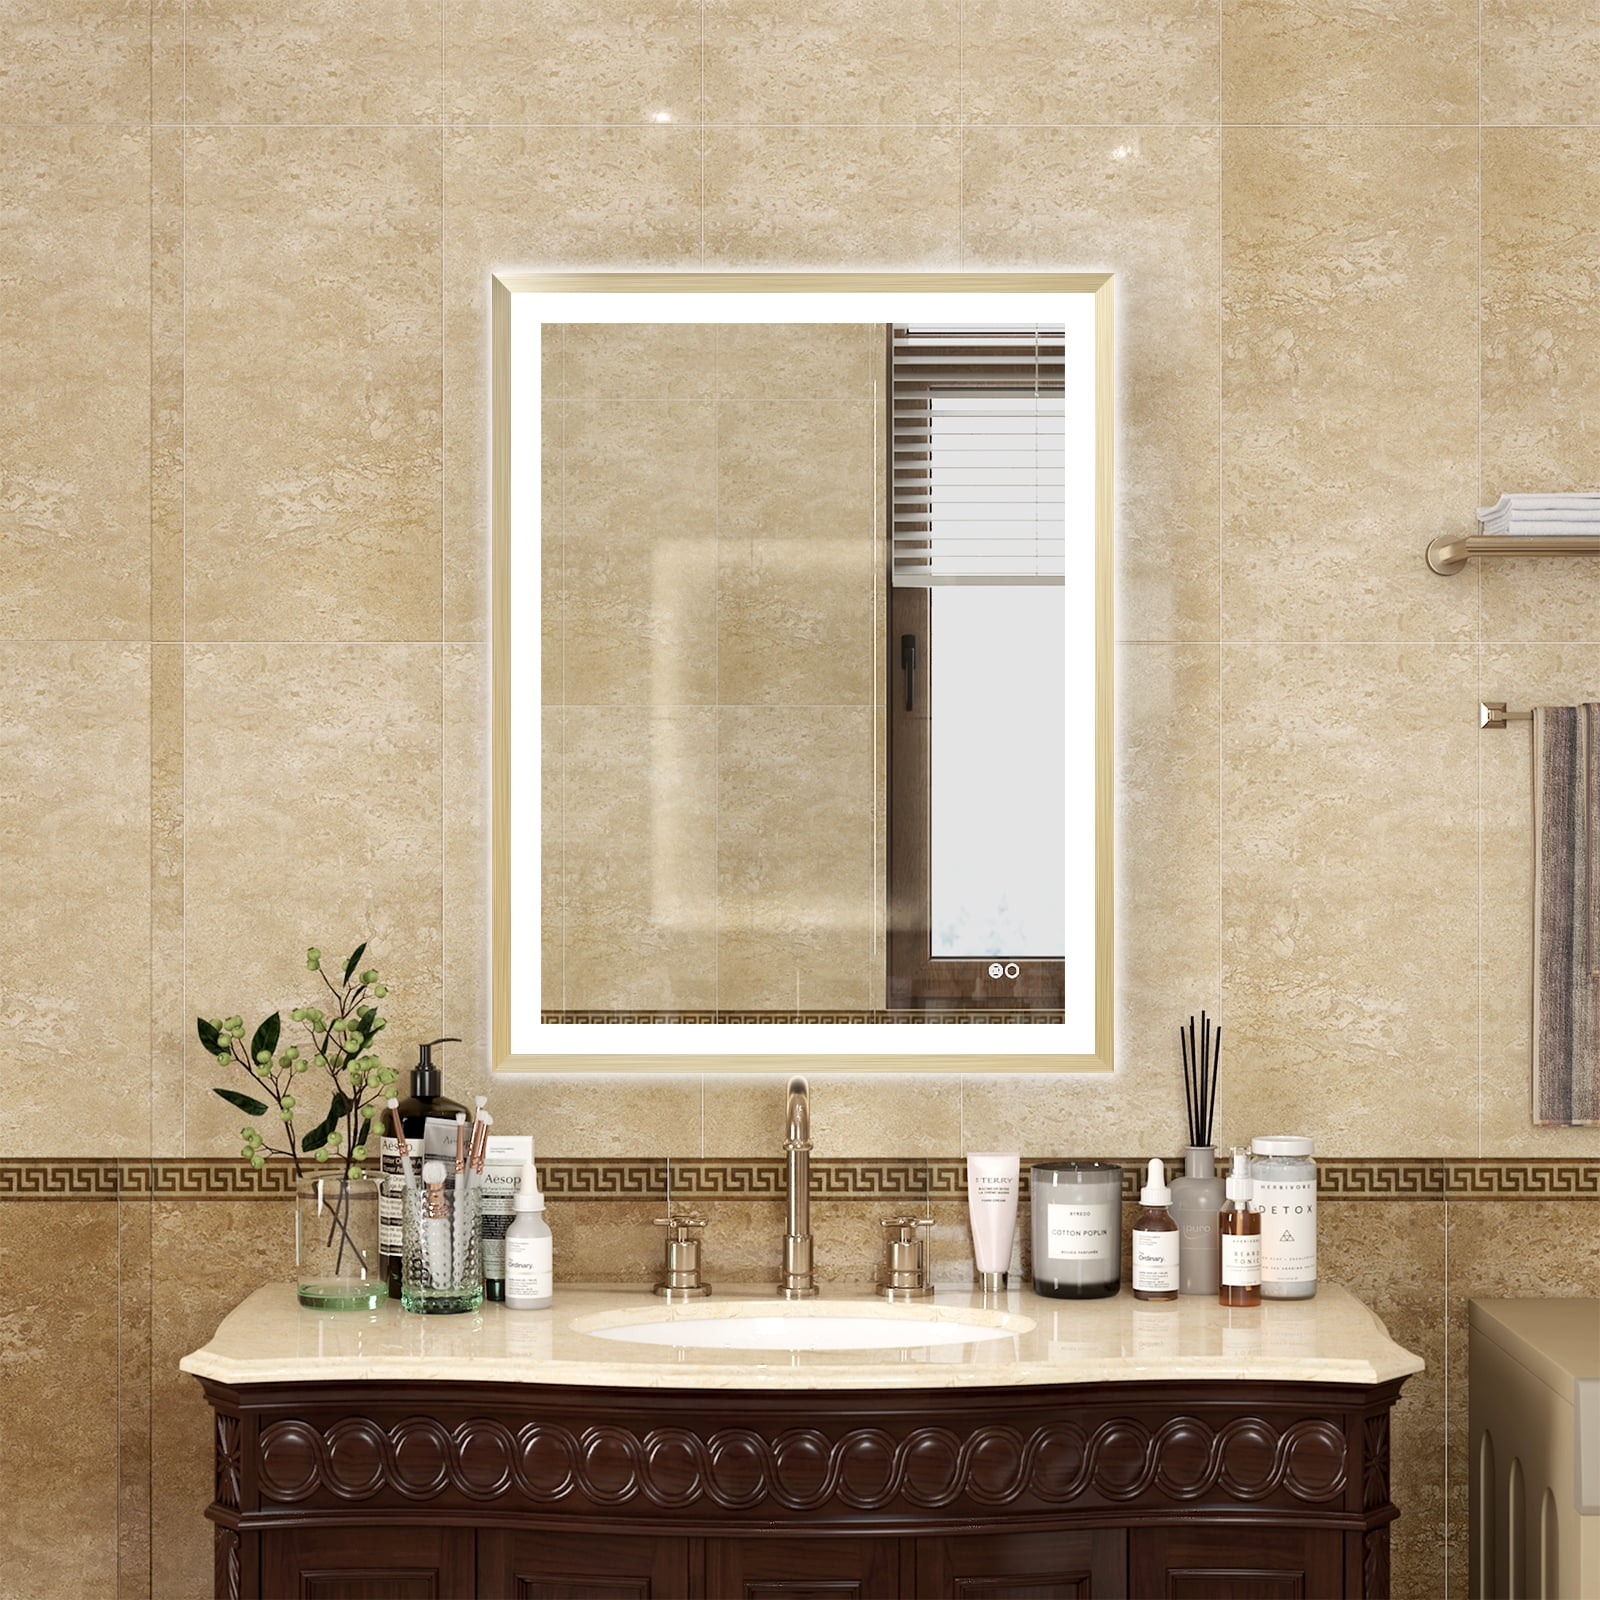 Forclover 28 x 36inch LED Bathroom Mirror, Backlit and Front Lighted Mirror  for Bathroom, Wall Mounted Bathroom Vanity Framed Mirror Includes Dimmer,  Defogger, Vertical Horizontal, Gold